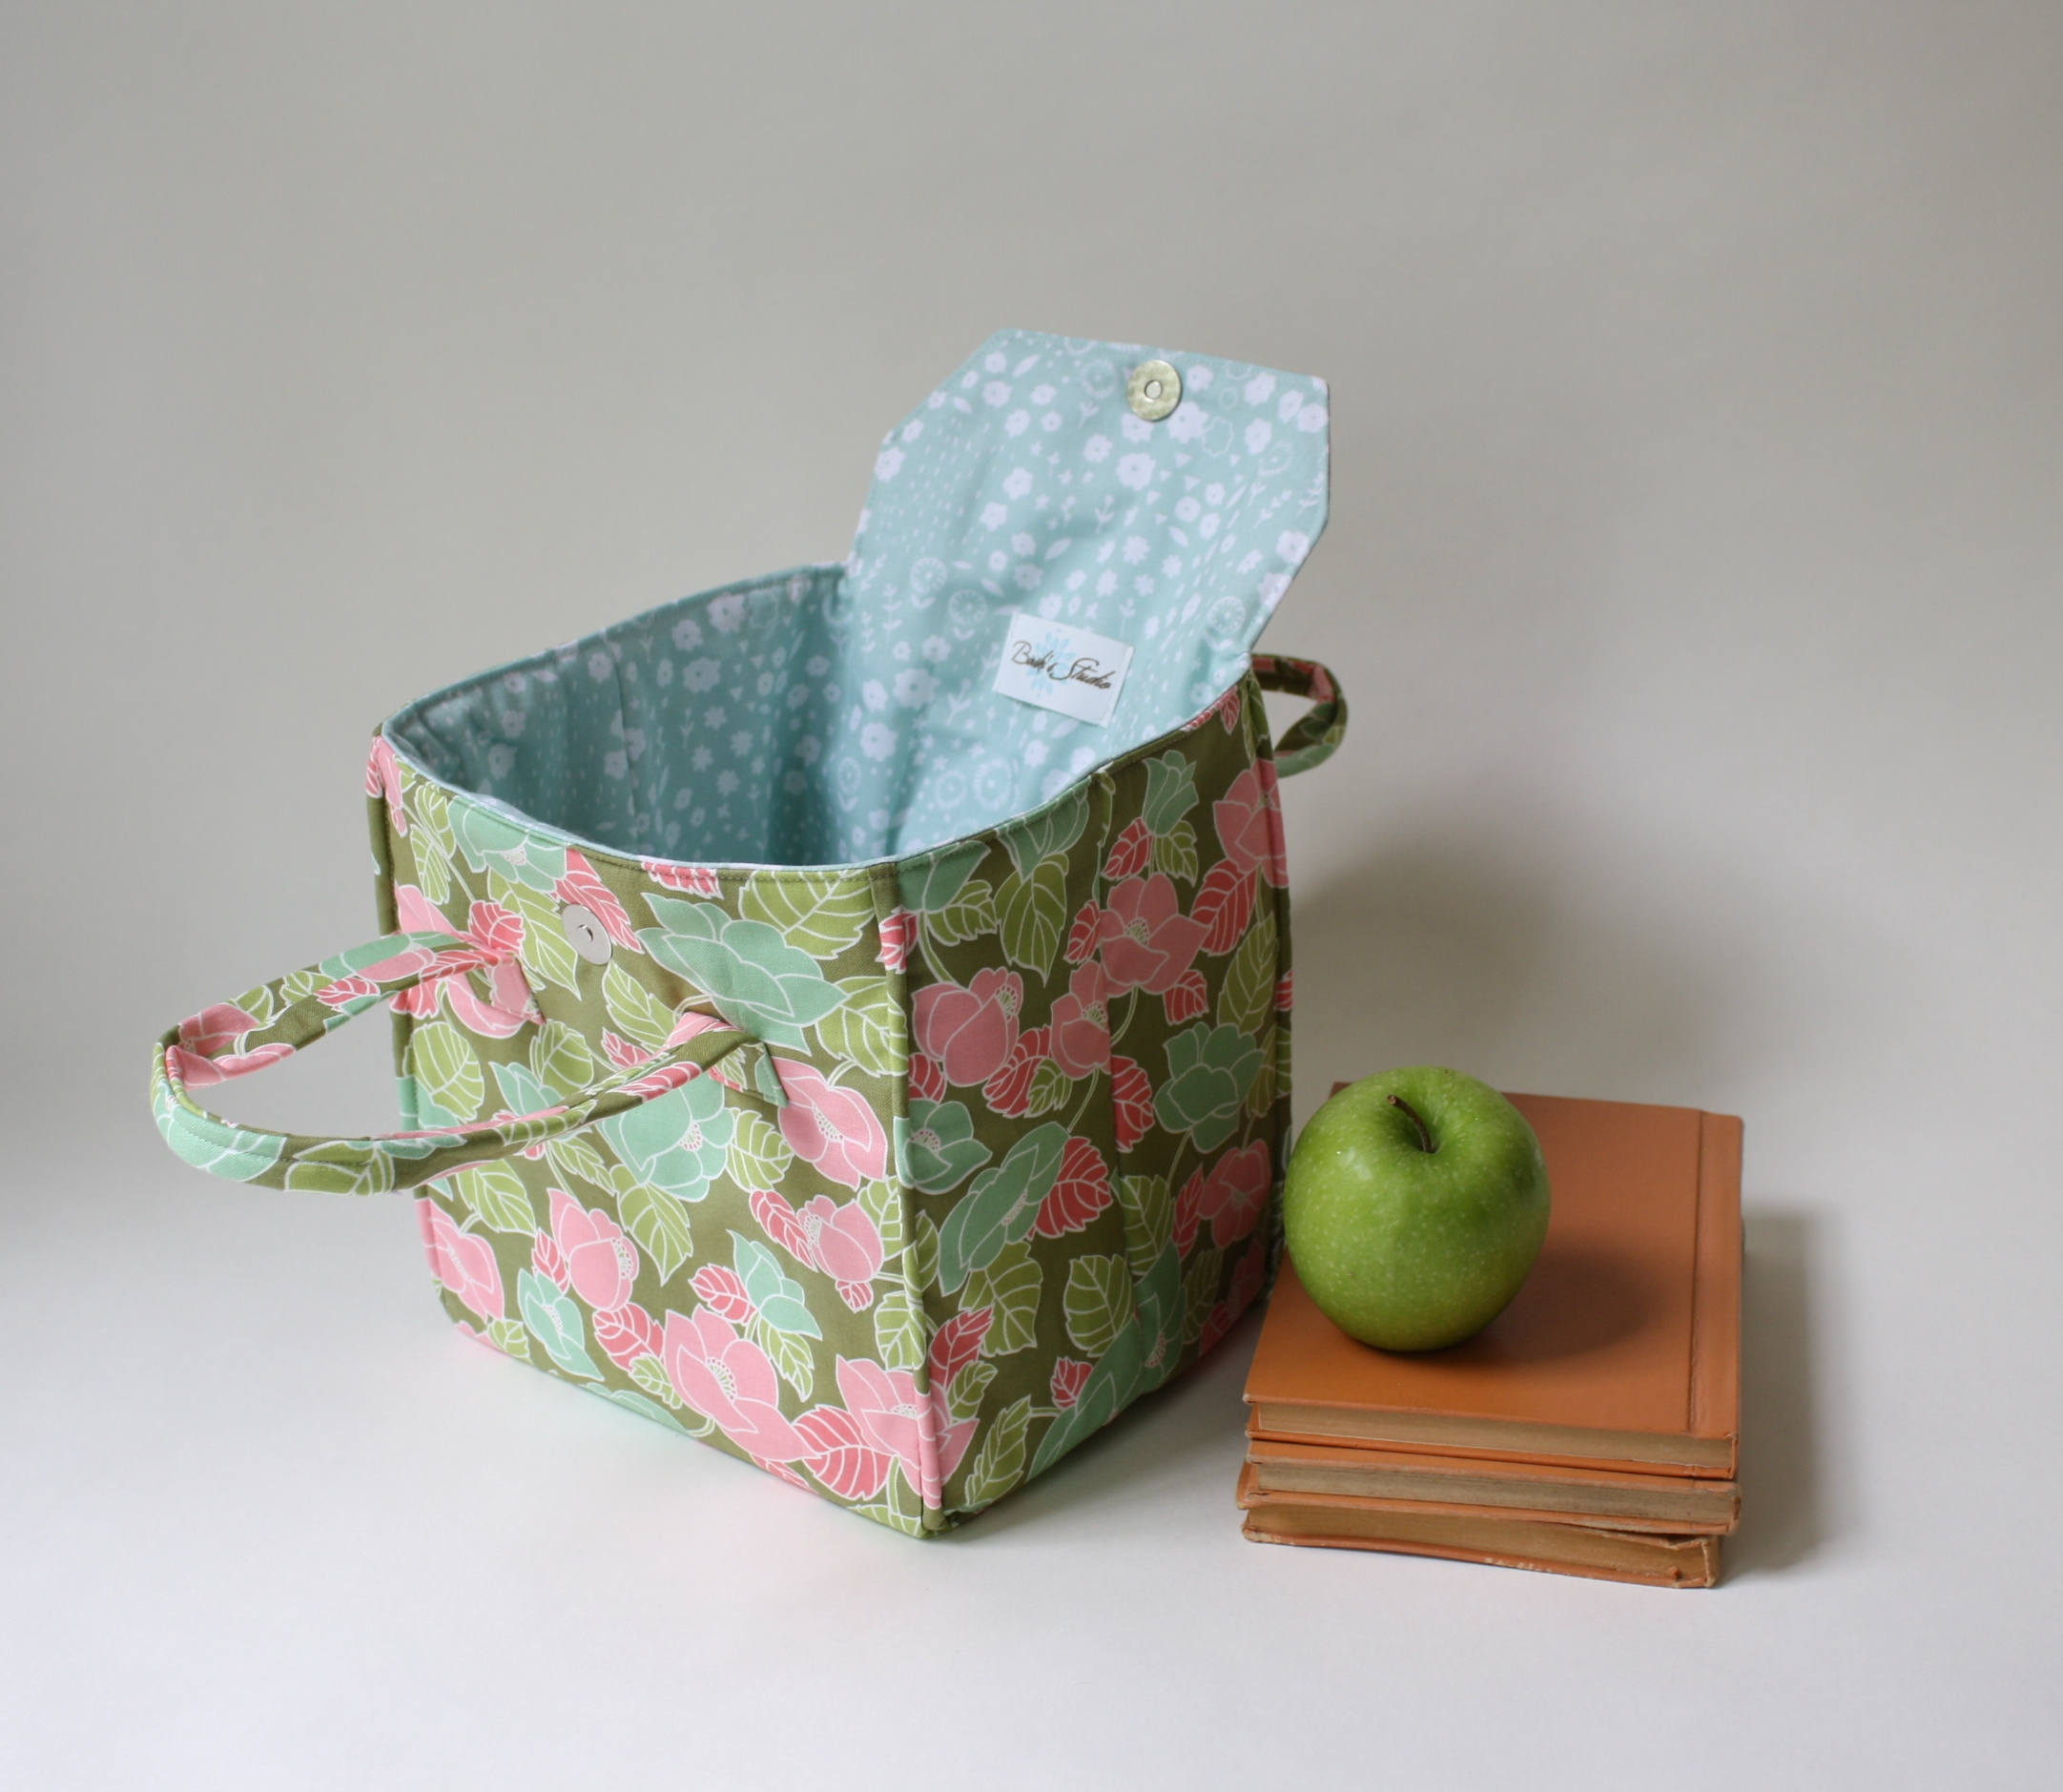 Insulated Lunch Bag in Summer Floral - Insulated Lunch Tote - Bento Box Carrier - Ready to Ship